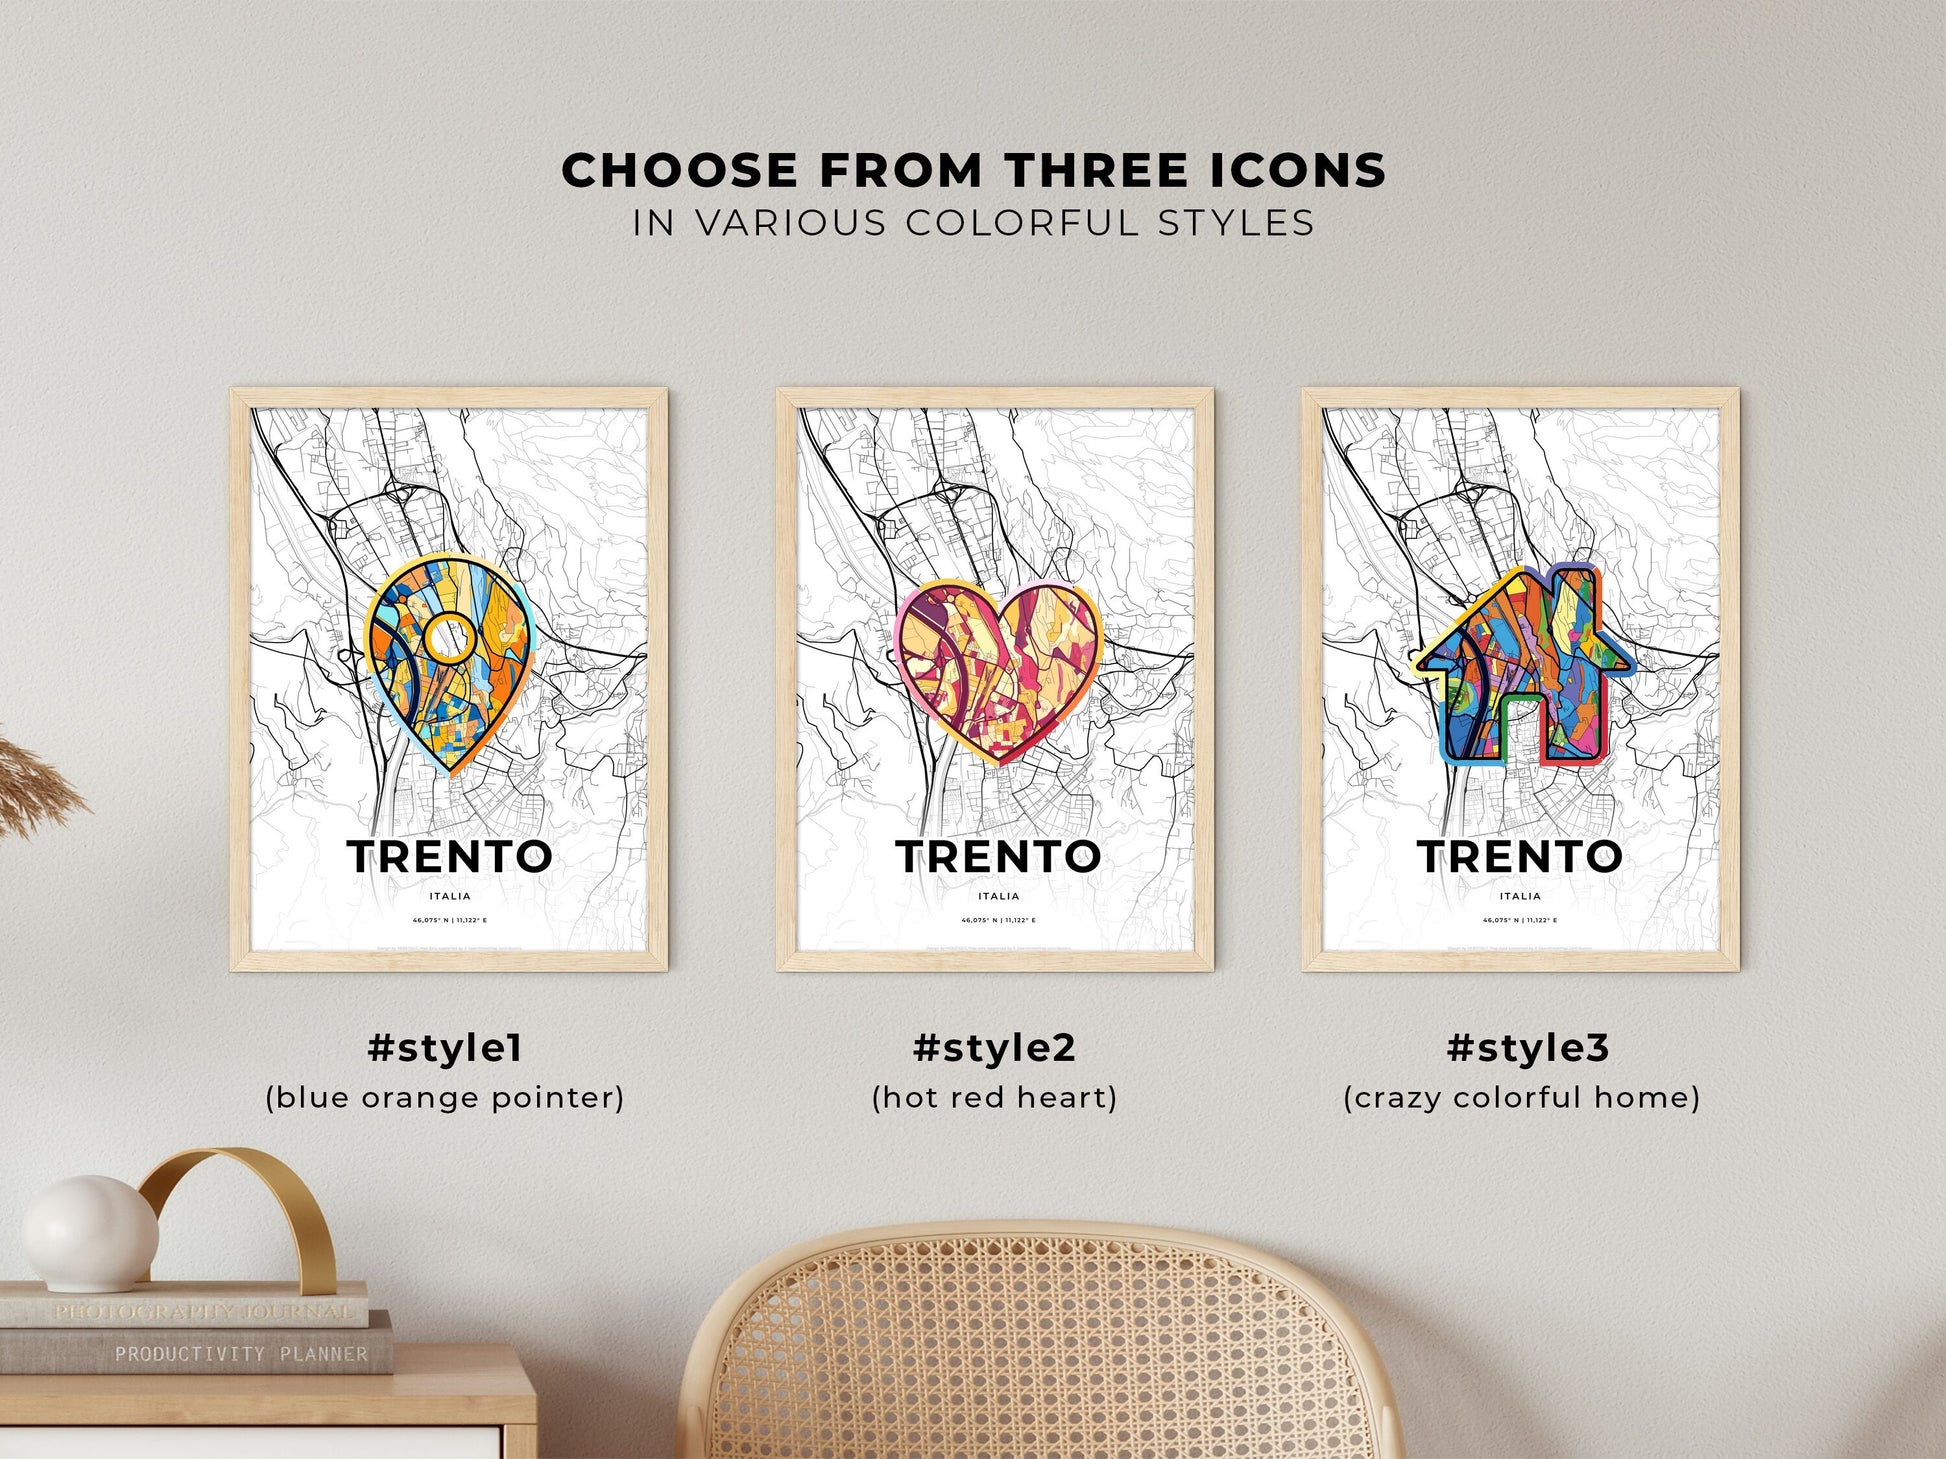 TRENTO ITALY minimal art map with a colorful icon. Where it all began, Couple map gift.